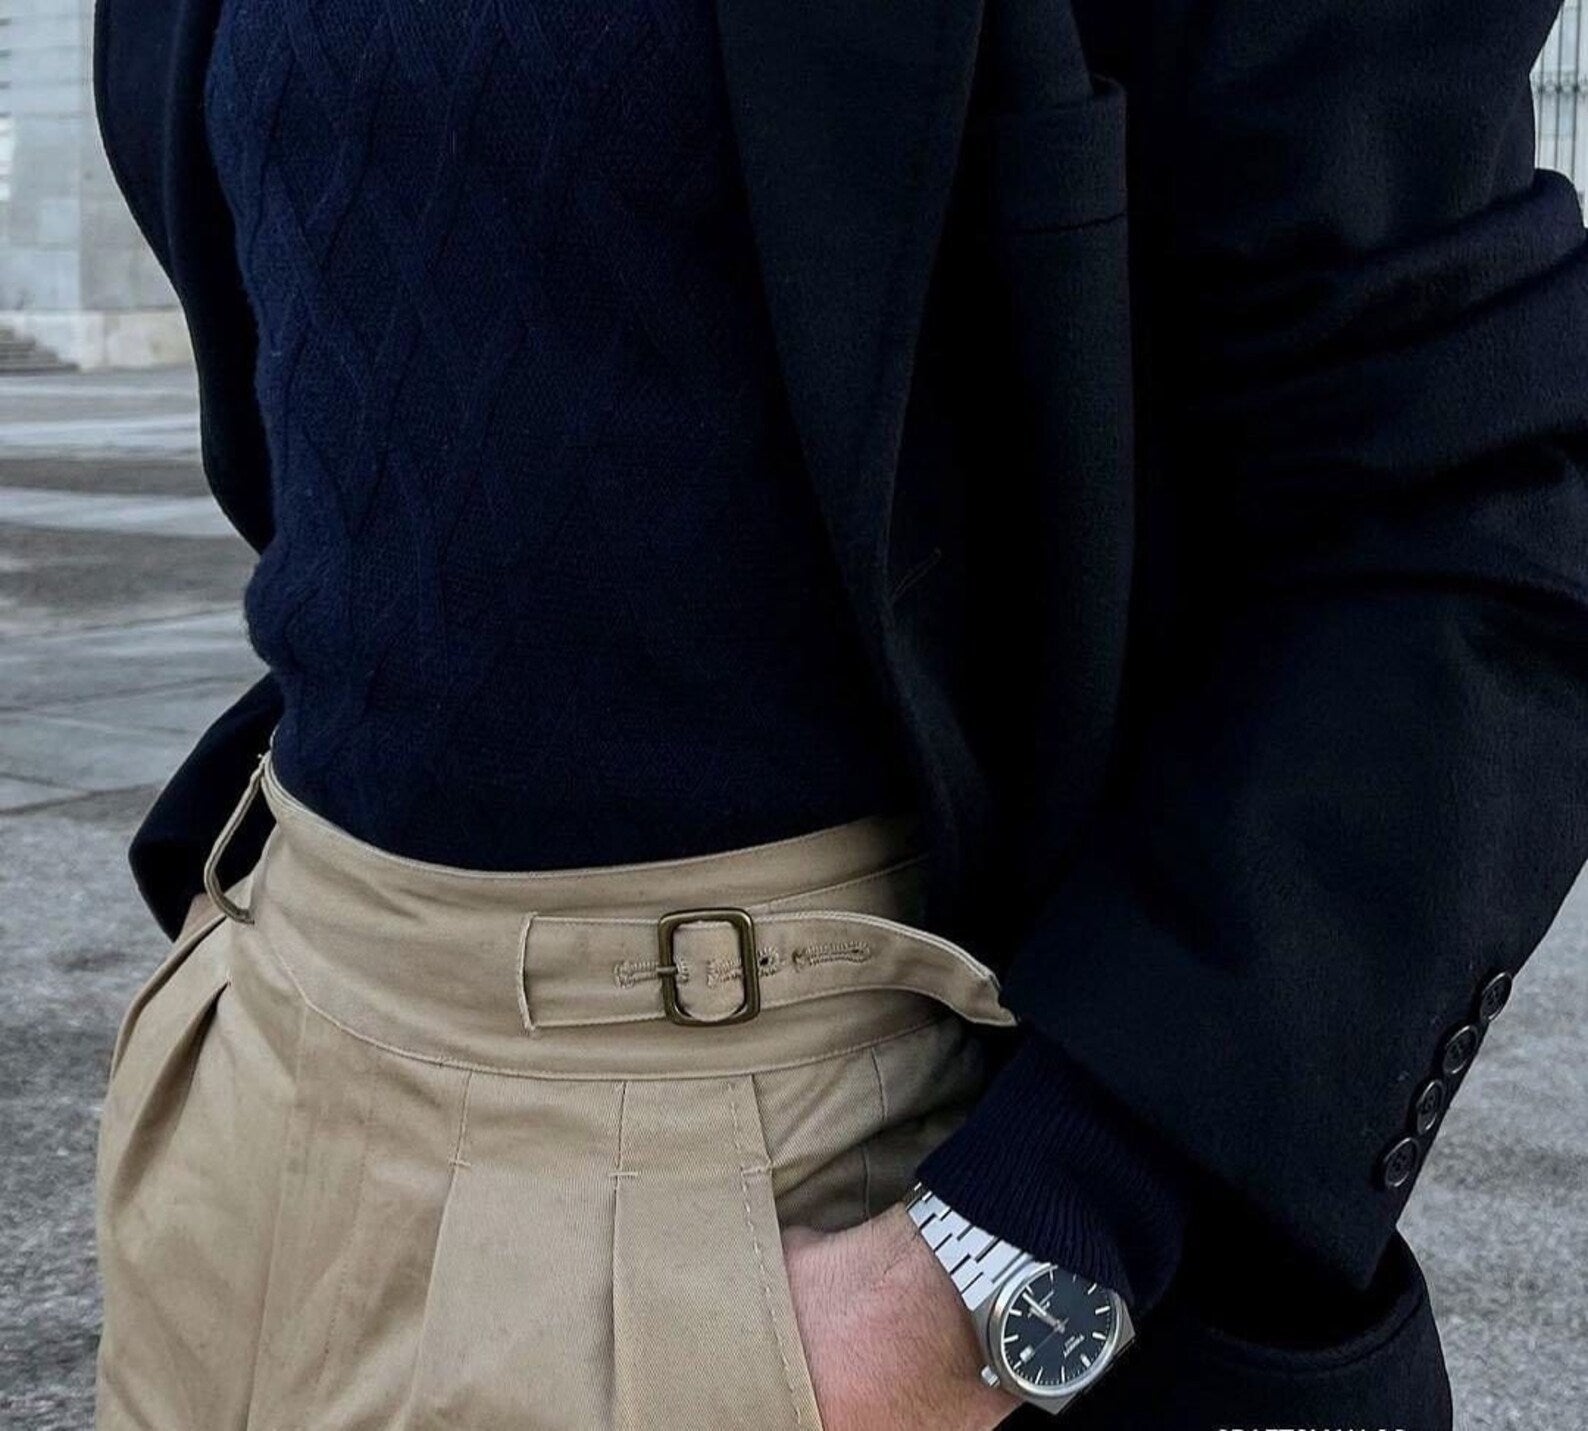 the military style trouser